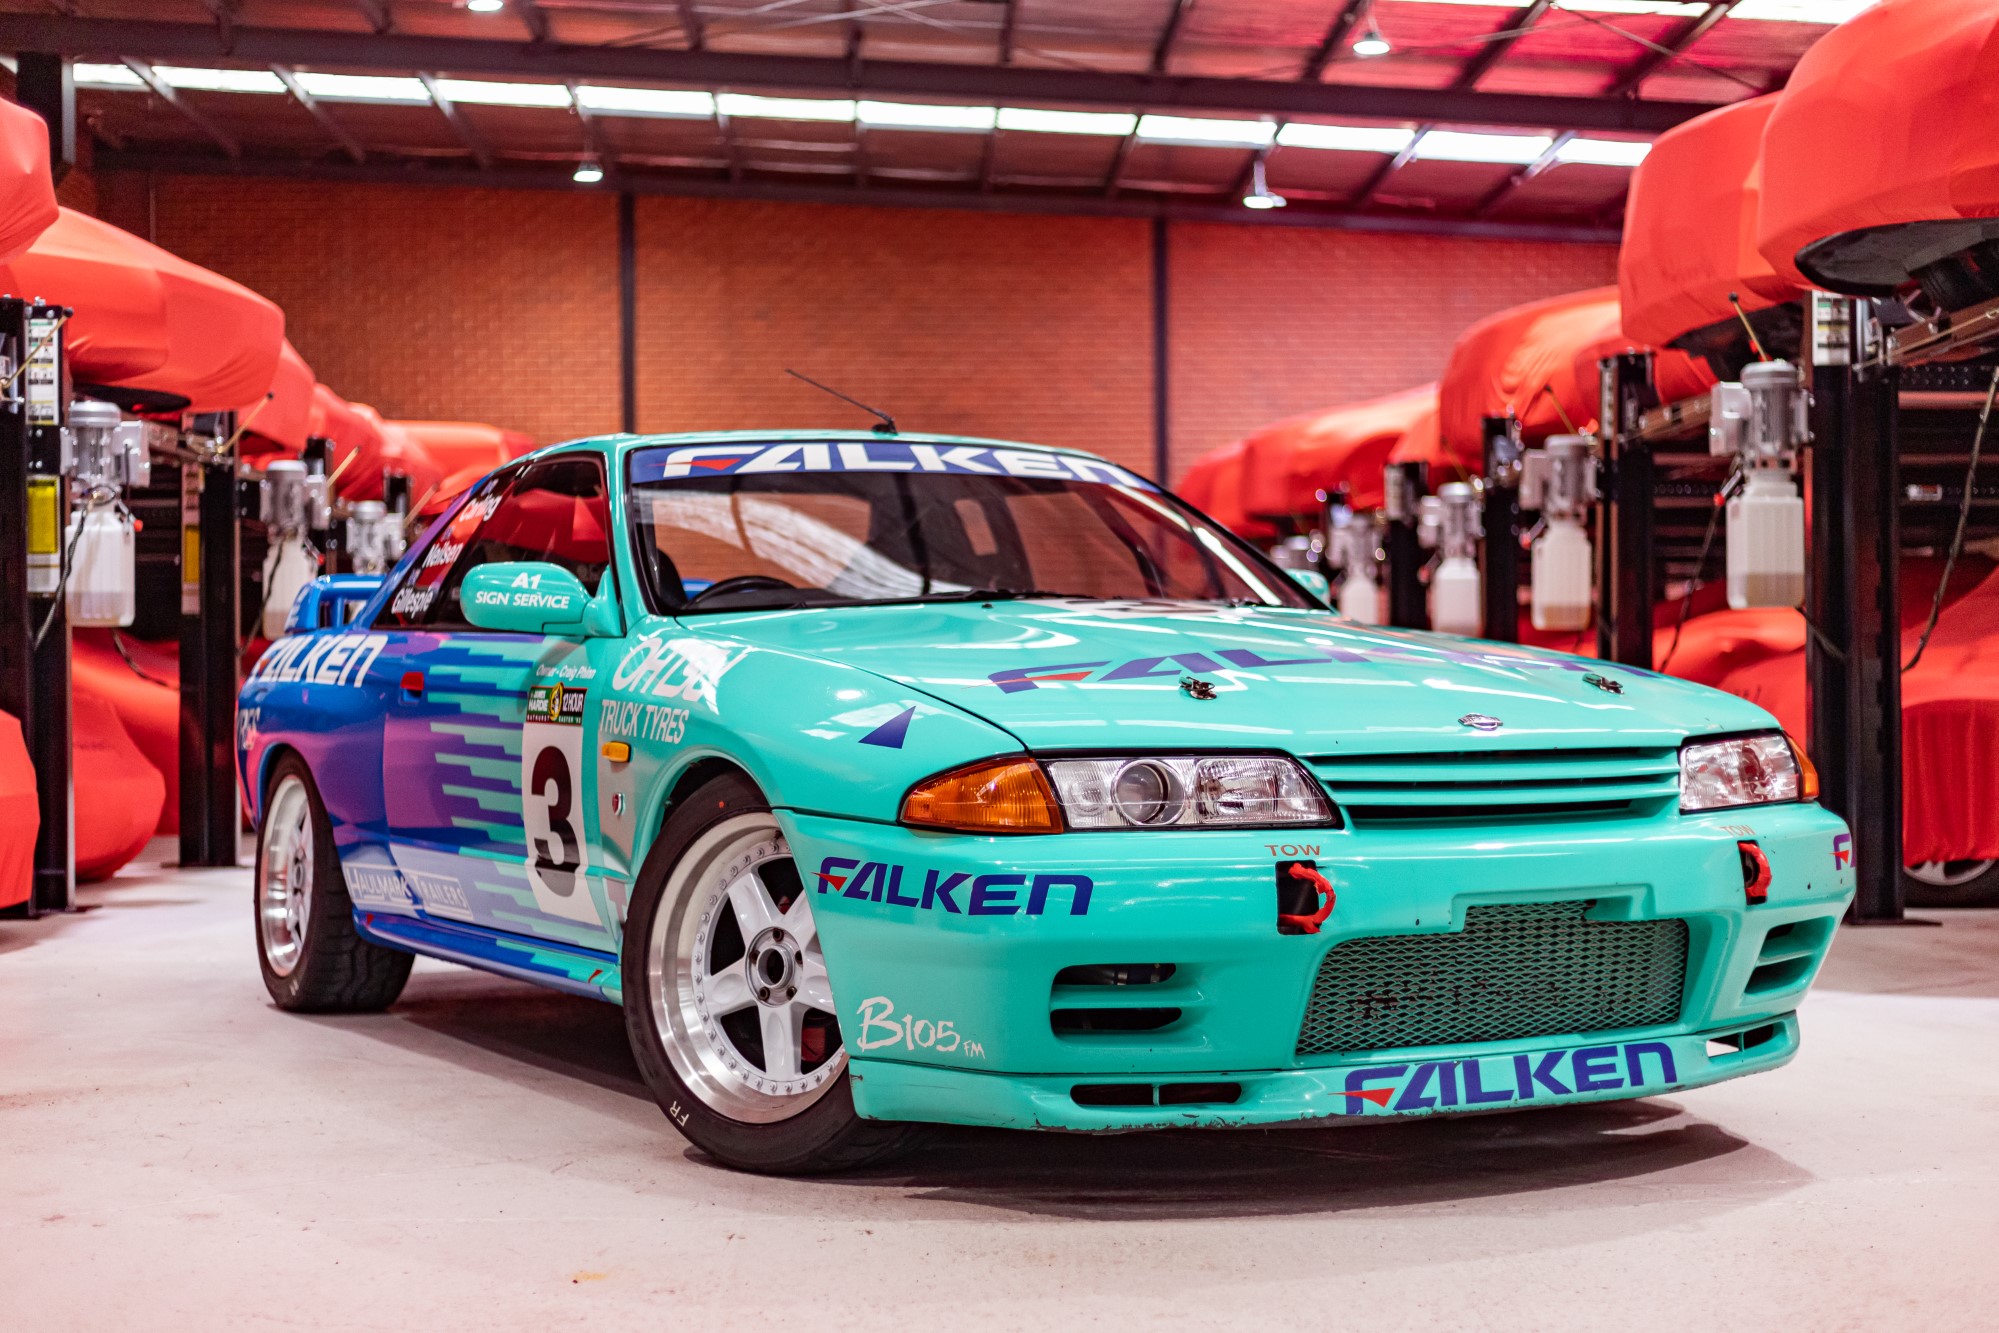 1990 NISSAN SKYLINE (R32) GT-R RACE CAR for sale by auction in 